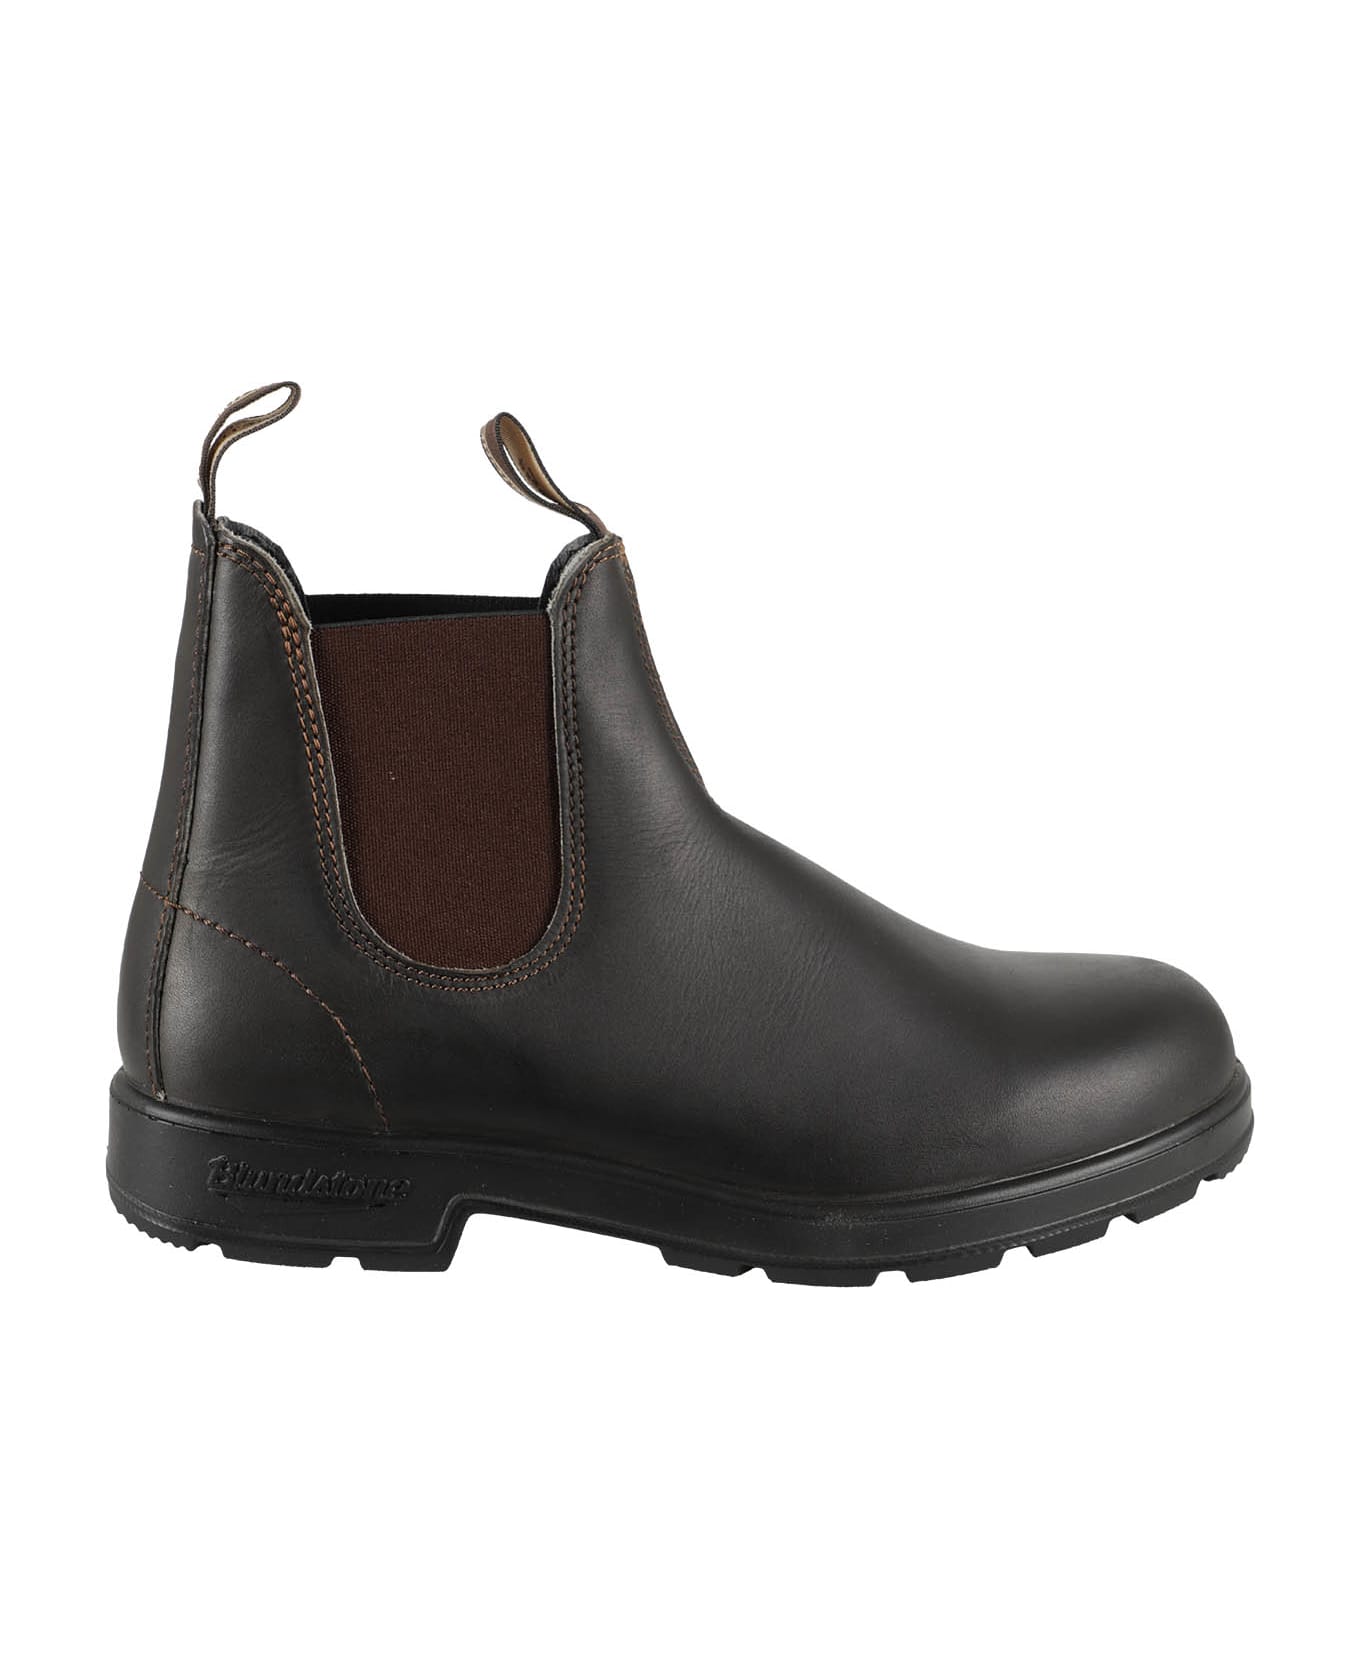 Blundstone Leather - Stout Brown Brown